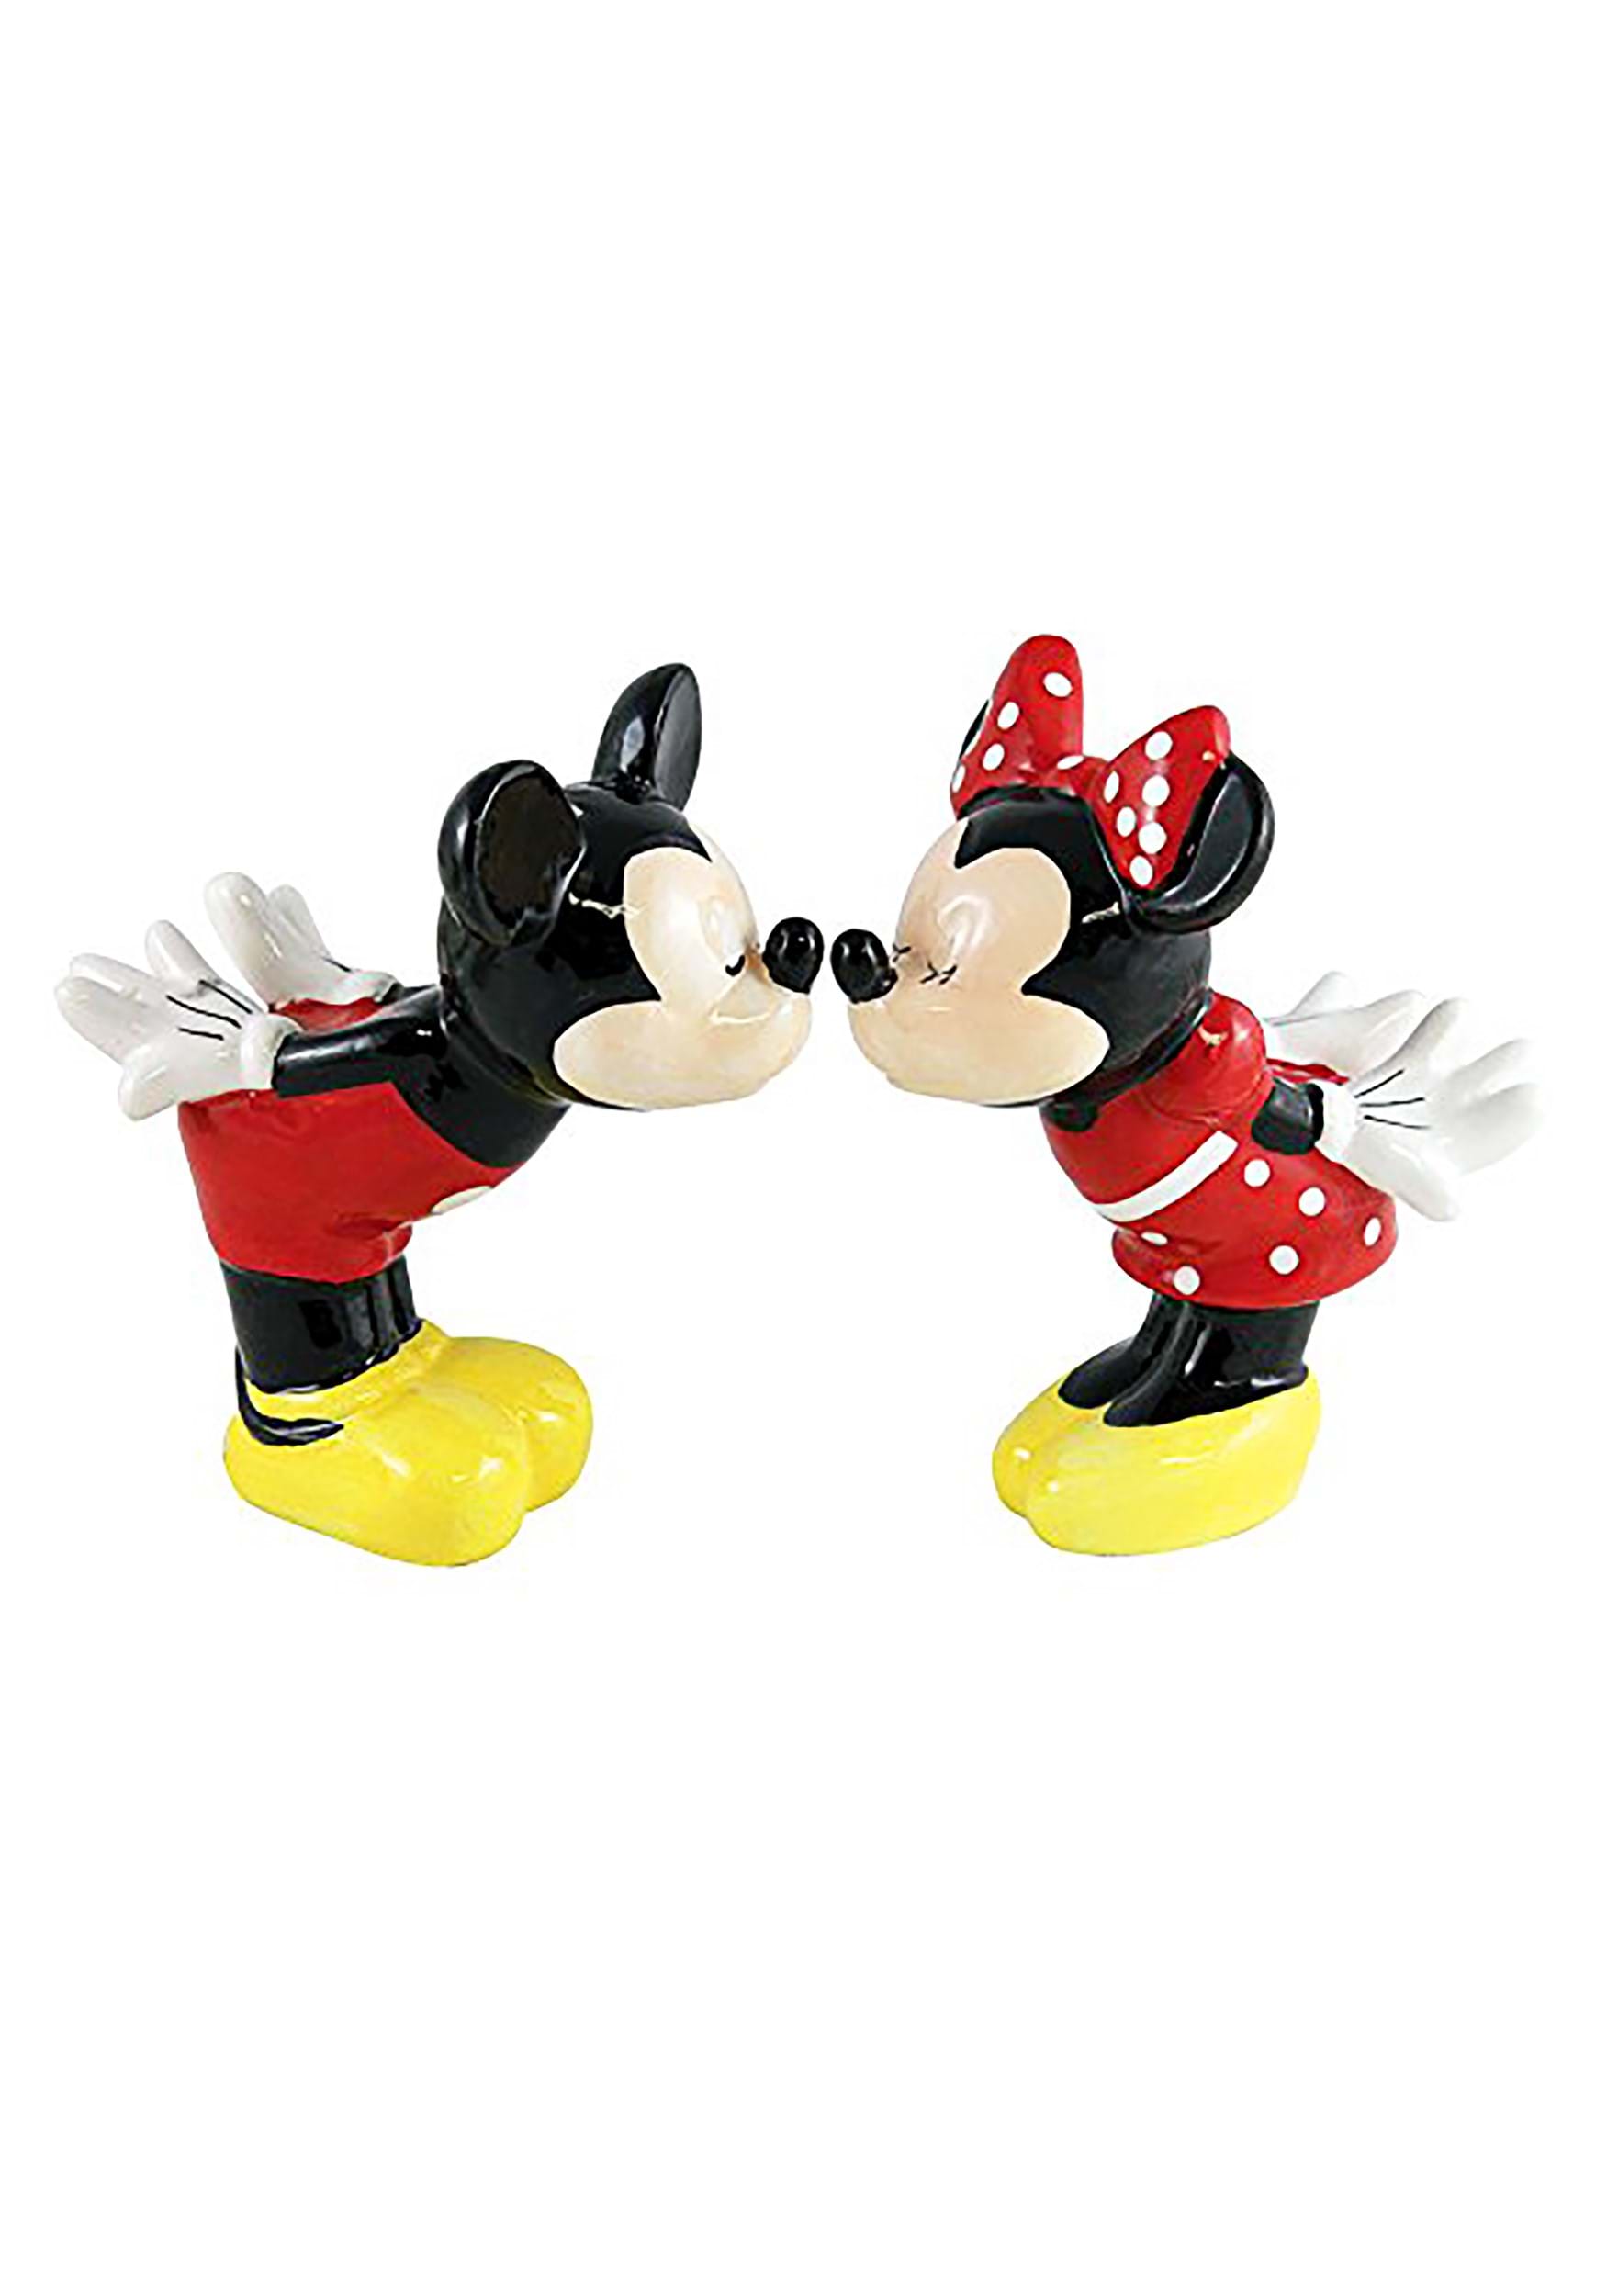 Disney Salt and Pepper Shakers - Mickey and Minnie Coffee Cups